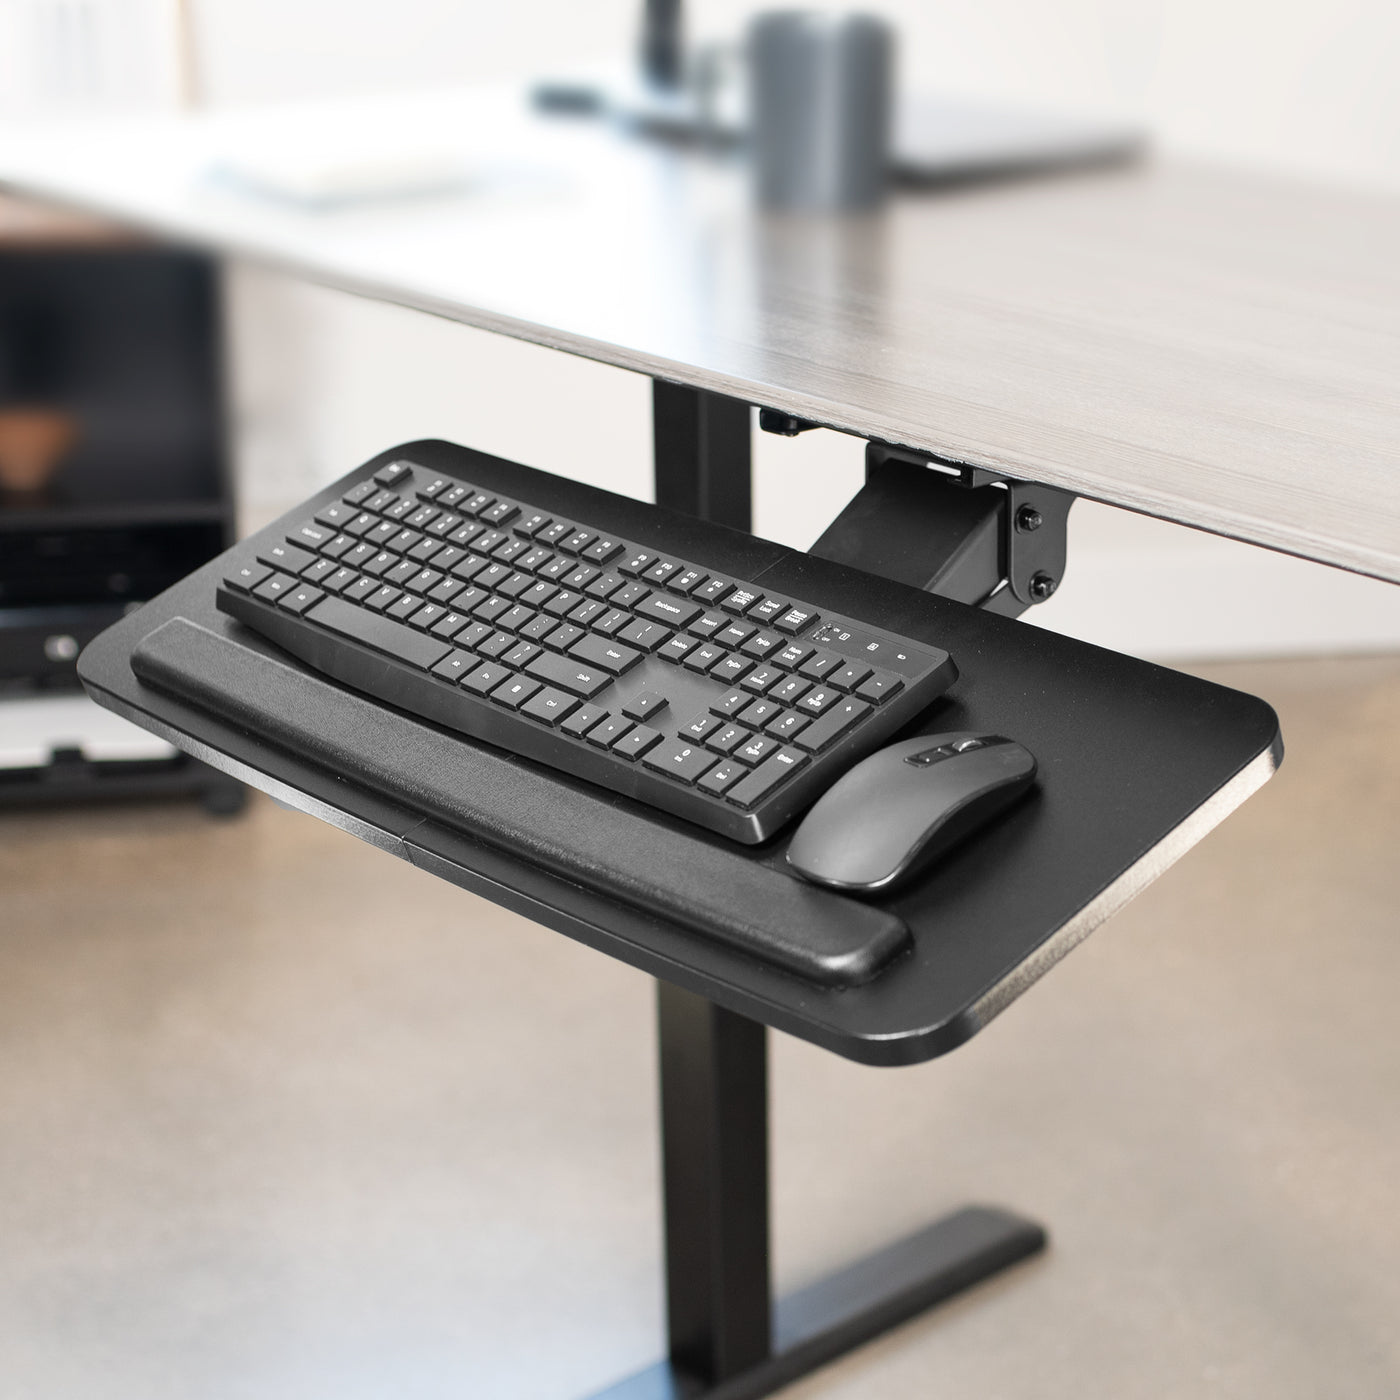 Ergonomic under desk keyboard tray mount with comfortable tilting angles for typing.